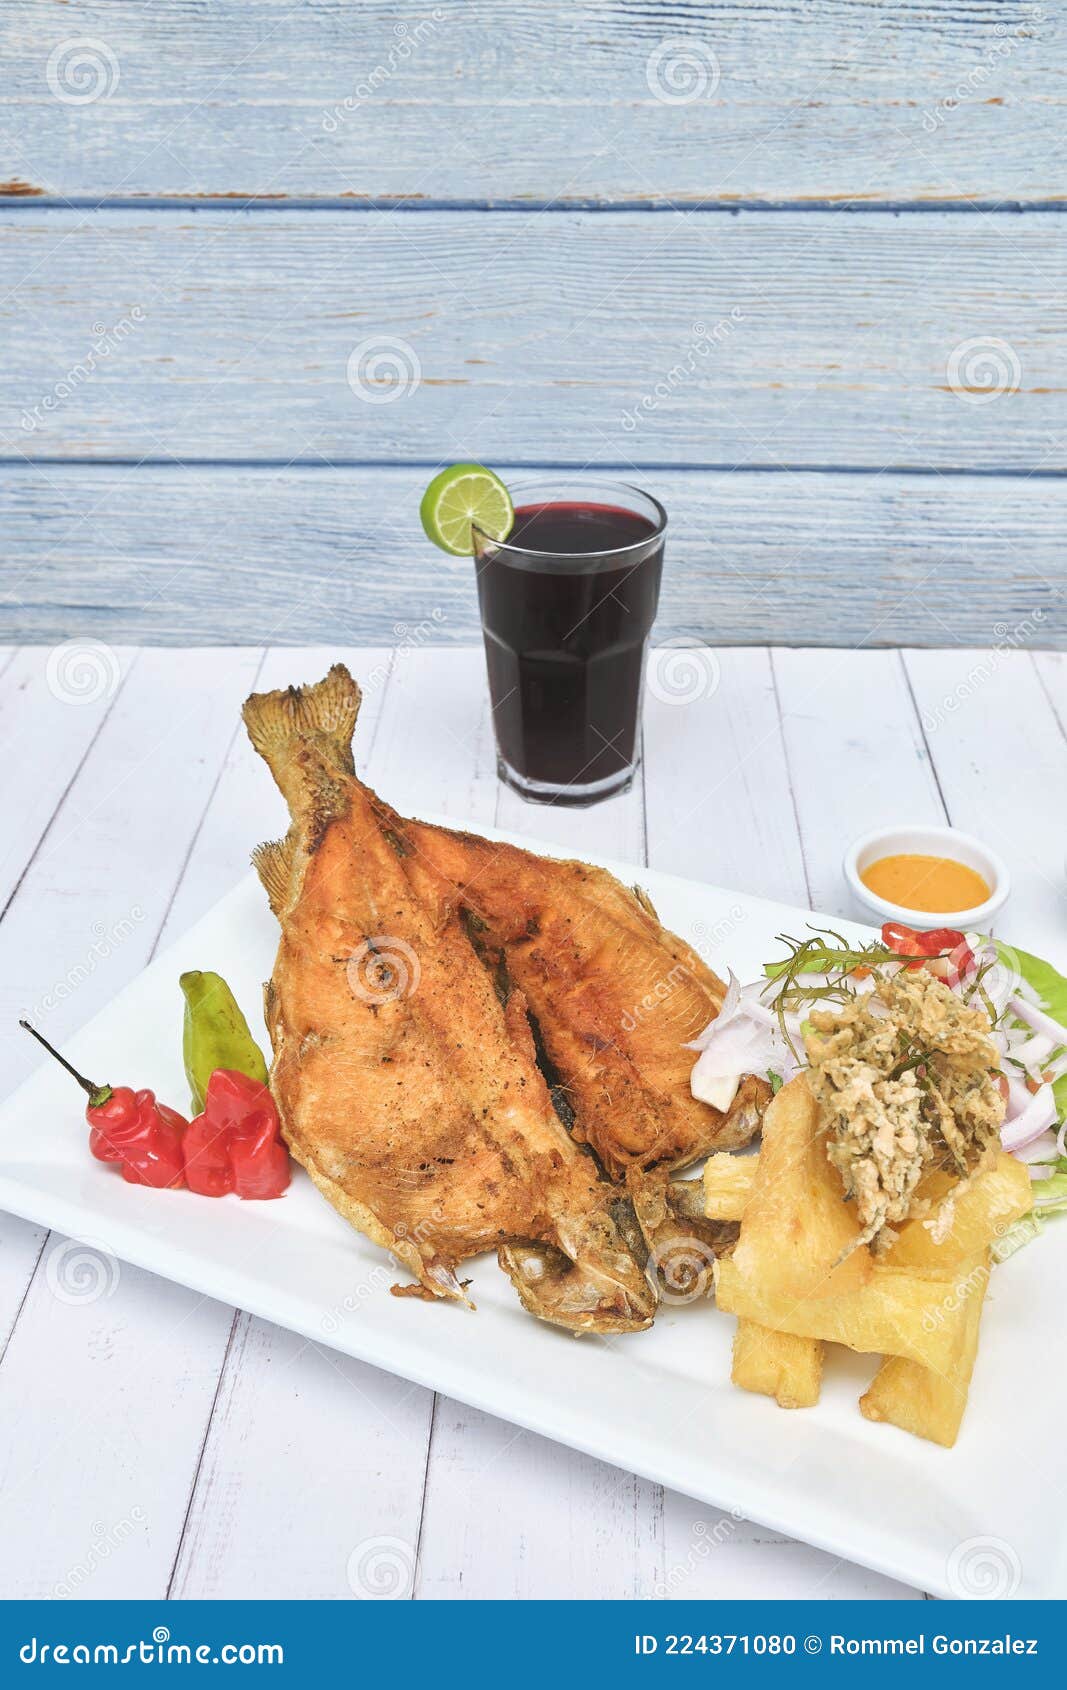 peruvian food, typical dish fried trout, with rice, yucca and salad, sective focus